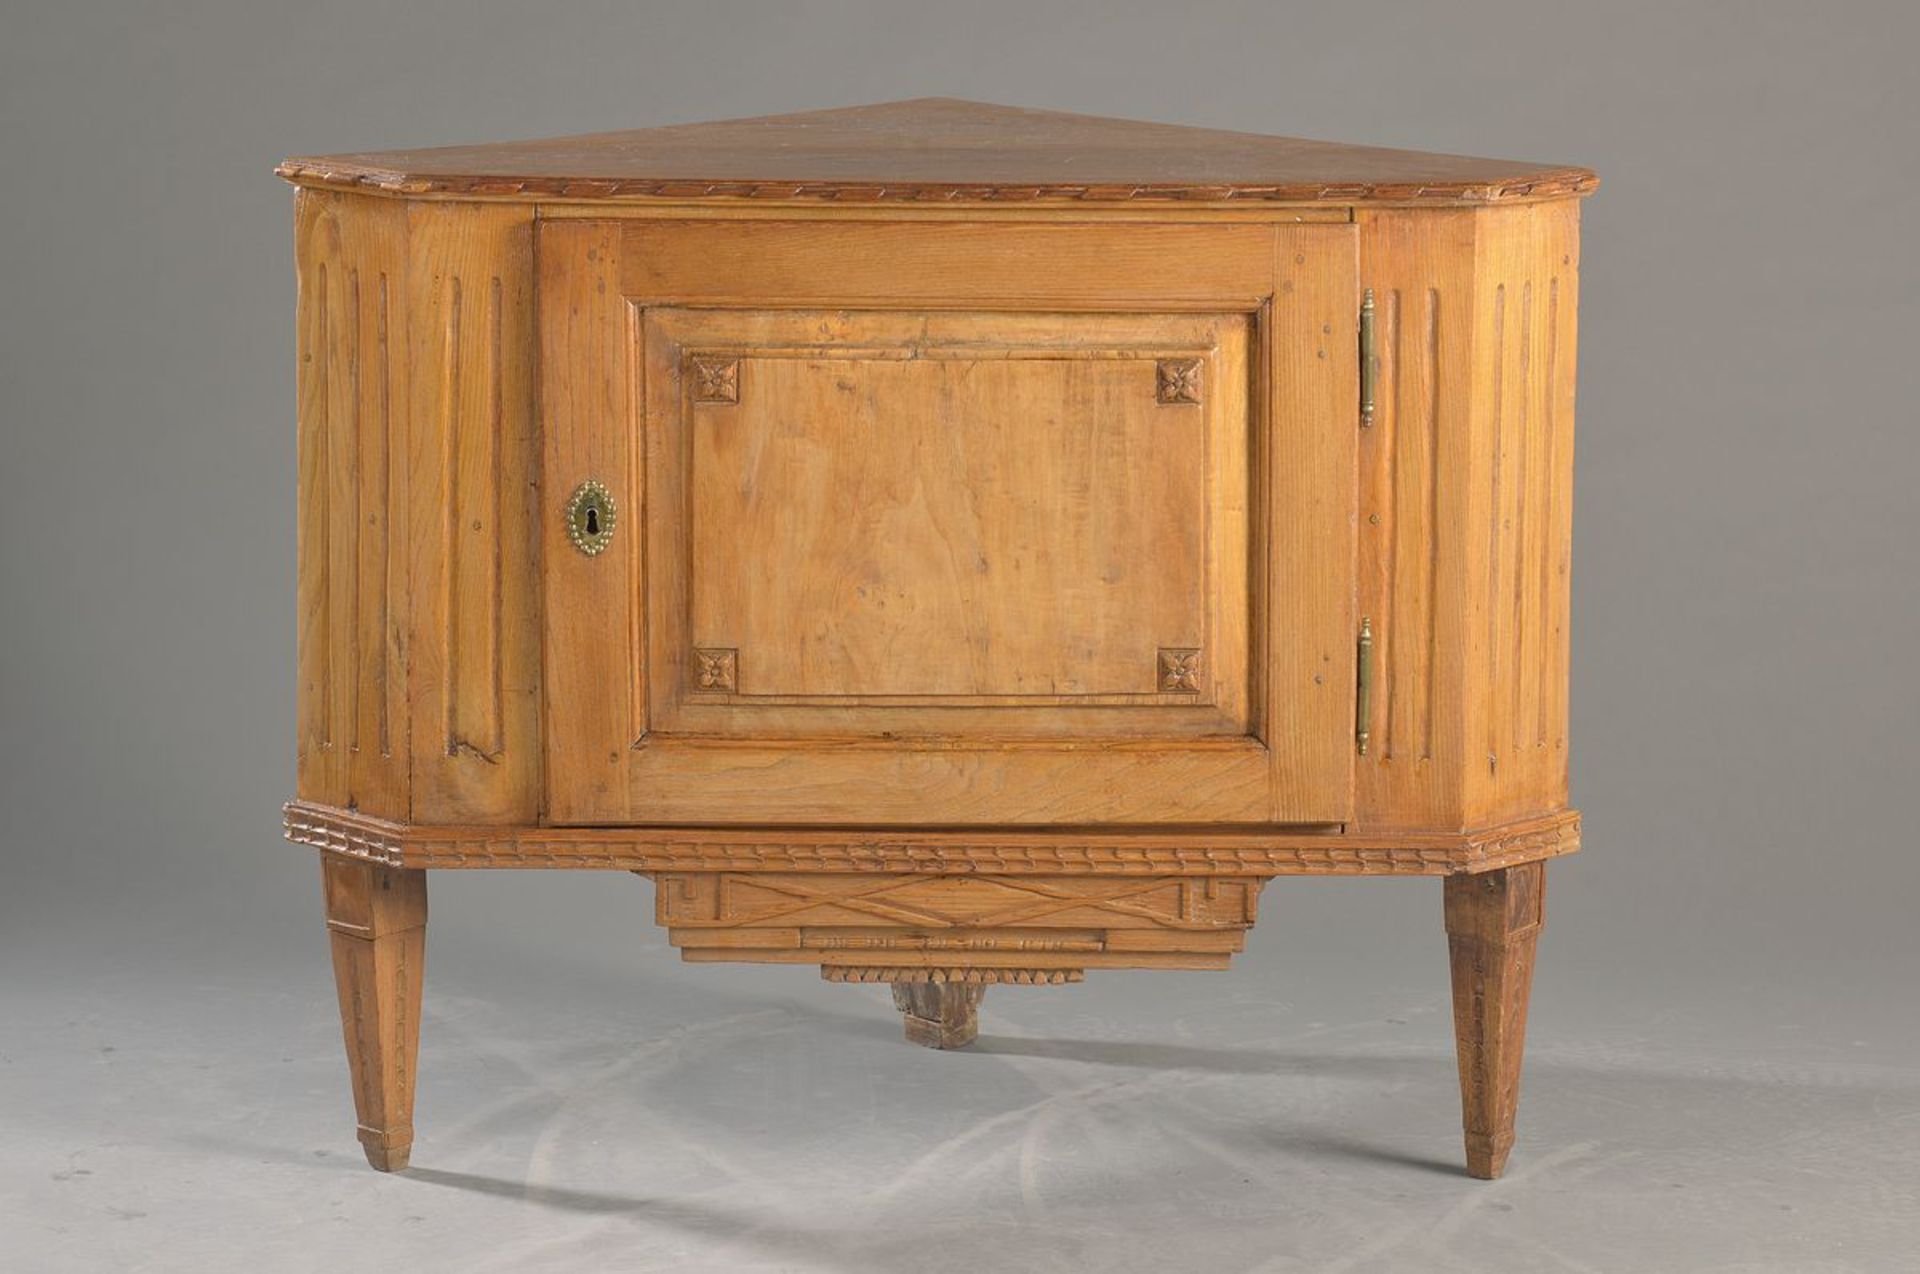 corner cupboard, German, around 1790/1800, elm tree massive carved, with attractive style typical